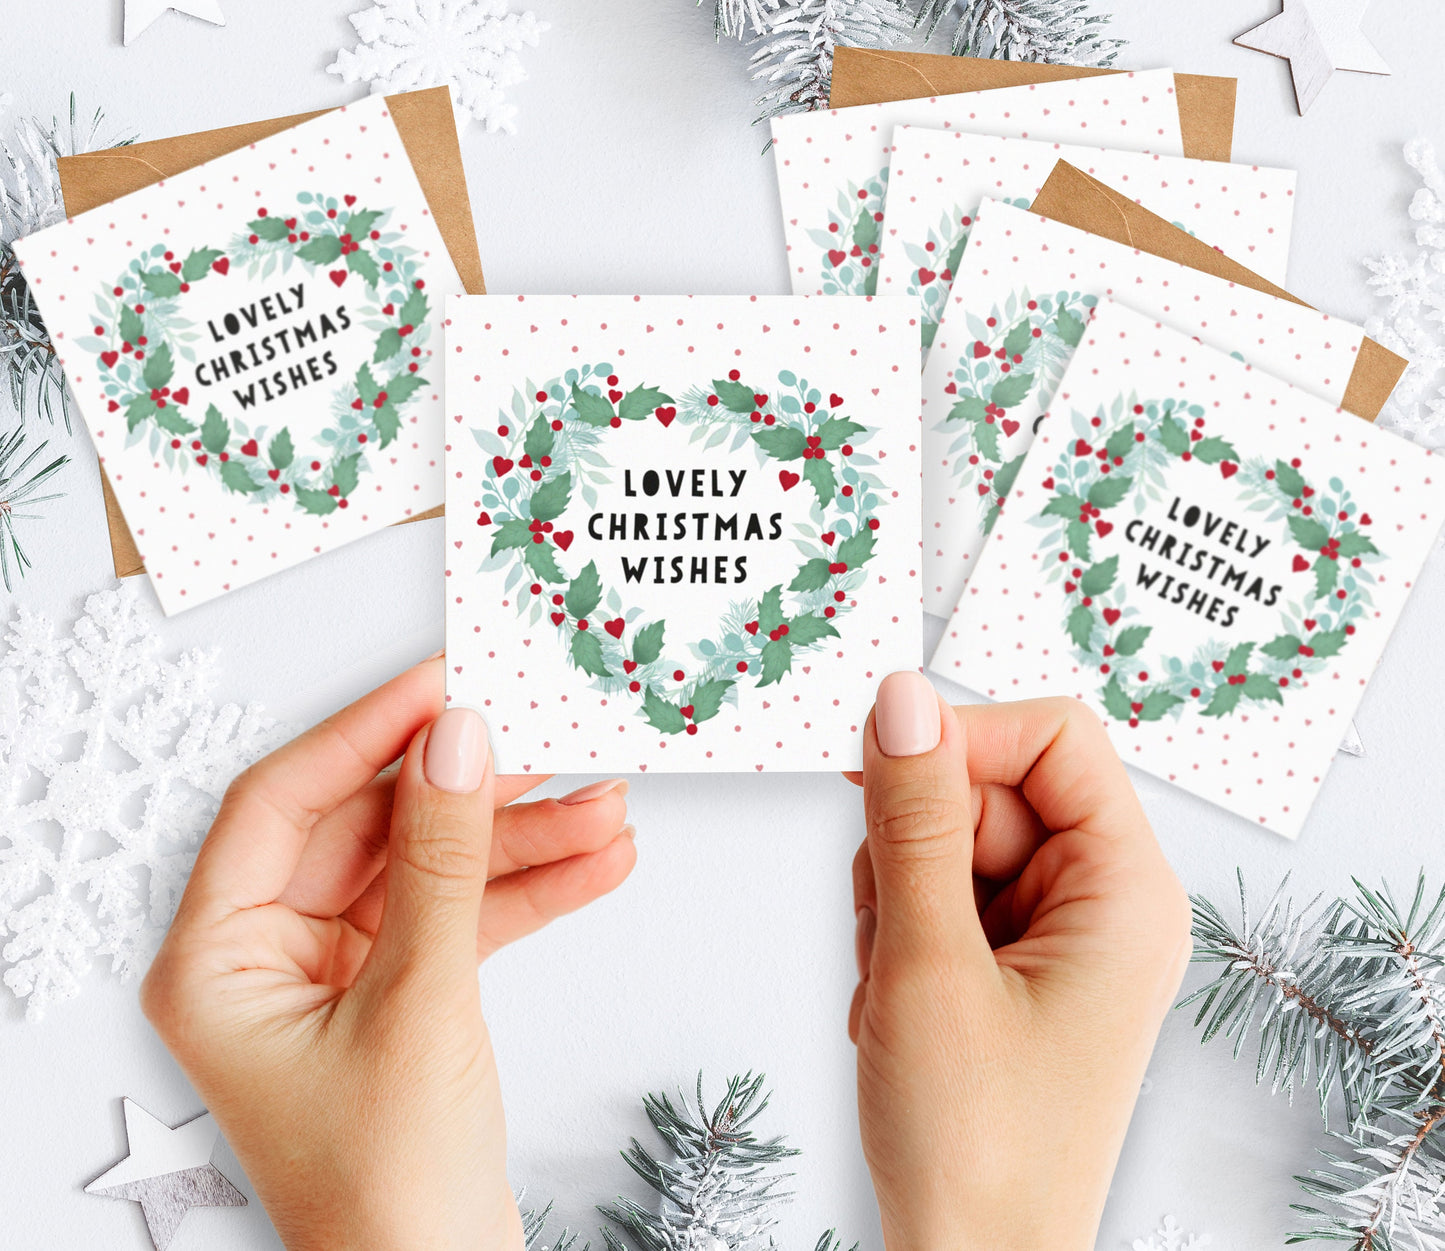 Mini Pack of Happiness - Lovely Christmas Wishes Christmas Cards. Pack of Christmas Cards. Cute Christmas. Heart Wreath Cards.